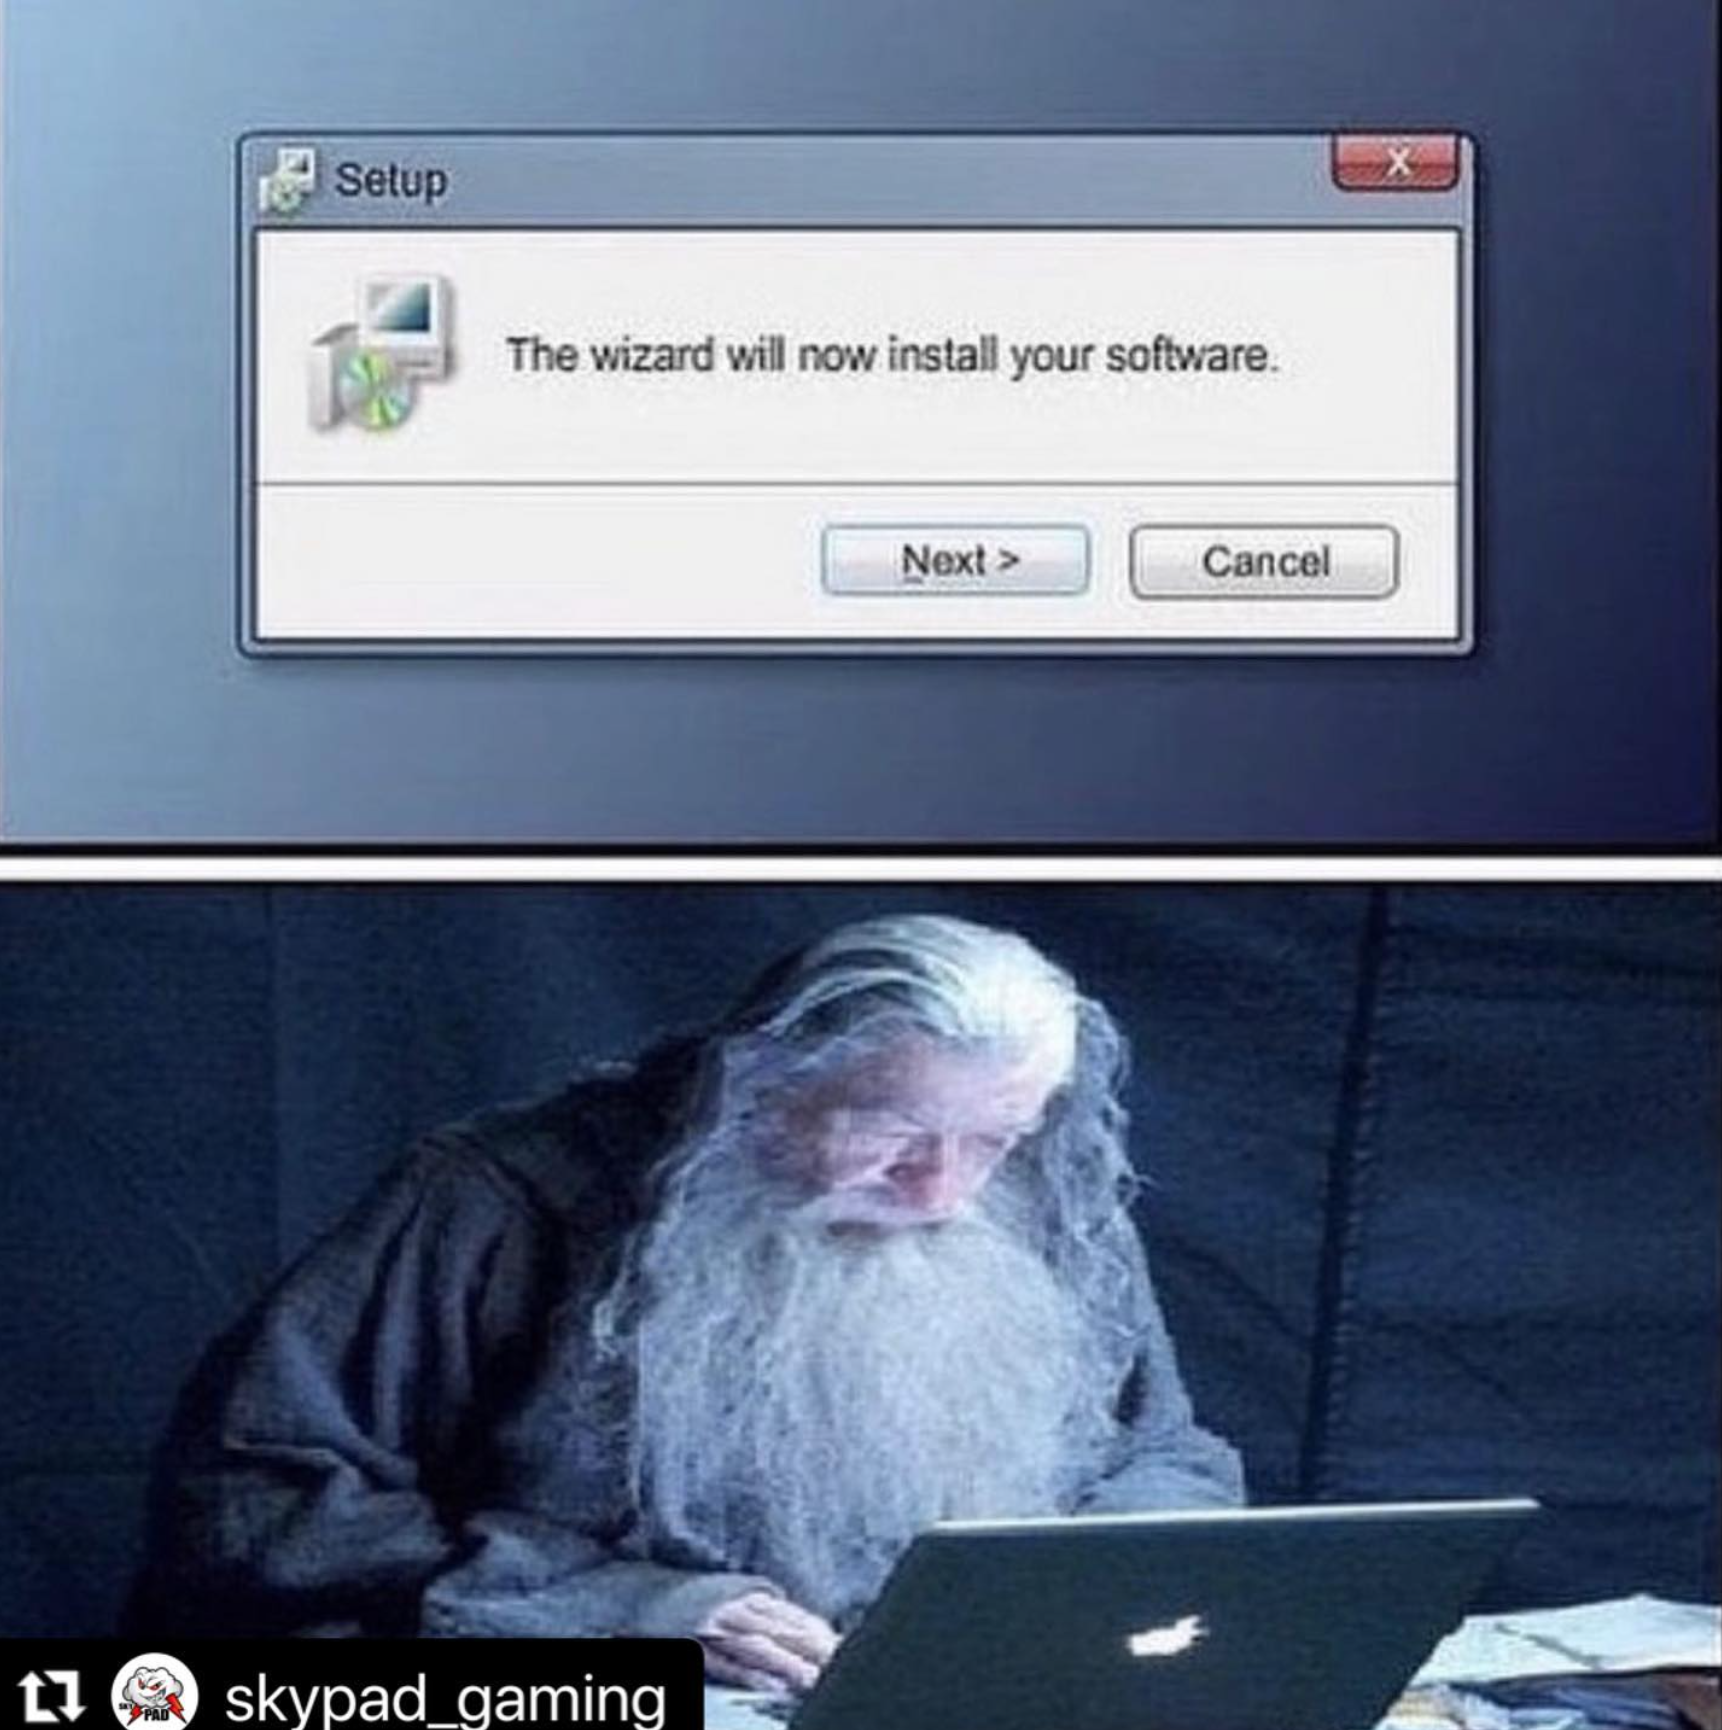 video game memes - wizard will install your software - Setup The wizard will now install your software. Next > Cancel tiskypad gaming